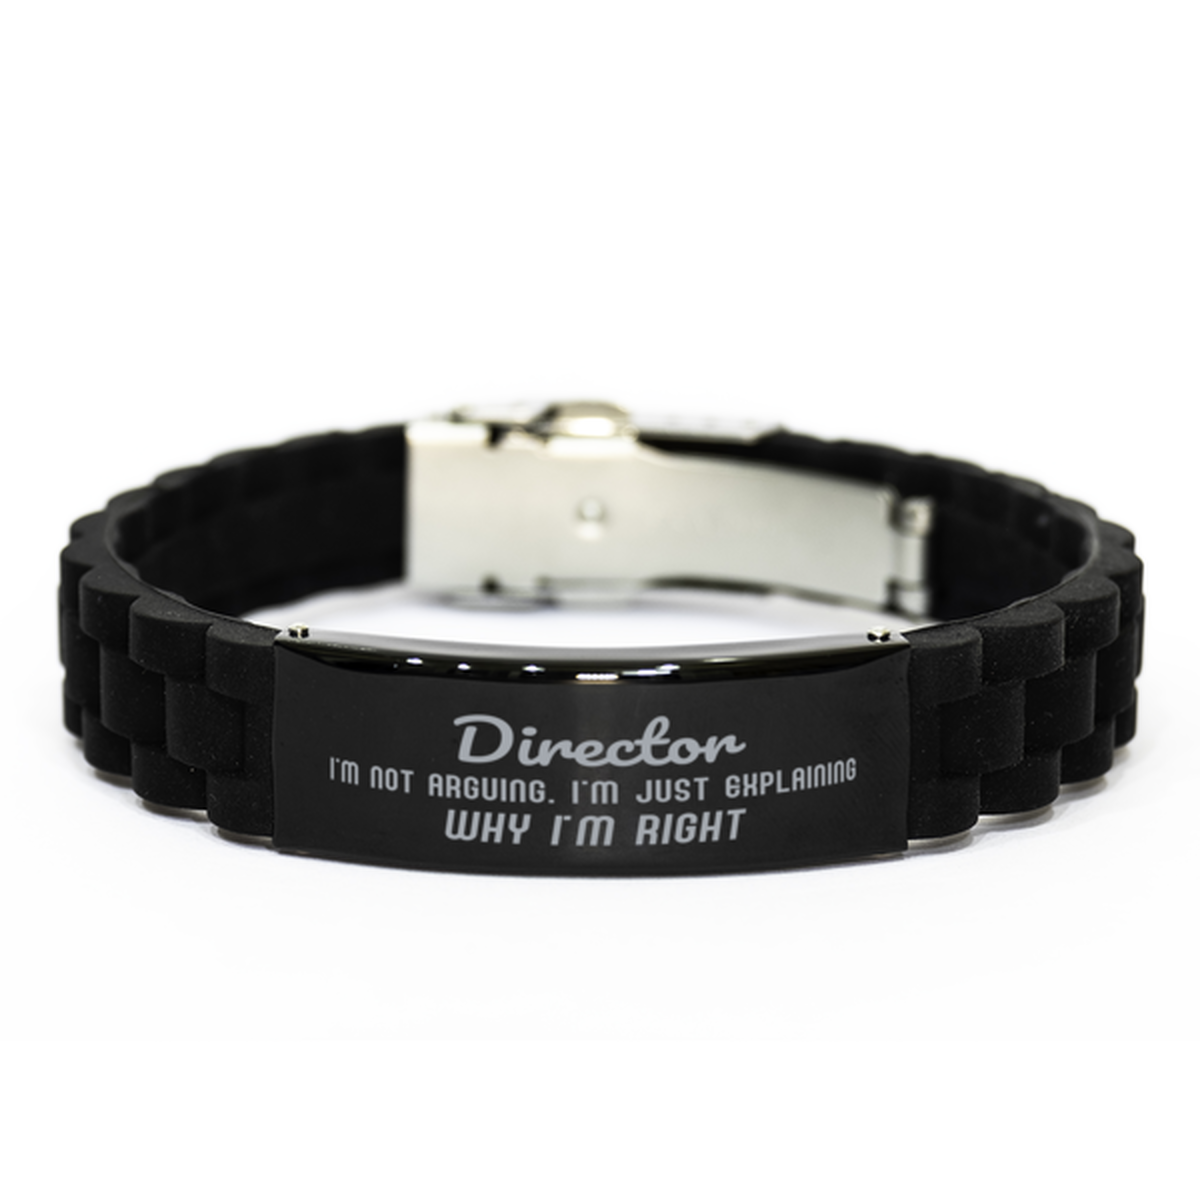 Director I'm not Arguing. I'm Just Explaining Why I'm RIGHT Black Glidelock Clasp Bracelet, Funny Saying Quote Director Gifts For Director Graduation Birthday Christmas Gifts for Men Women Coworker